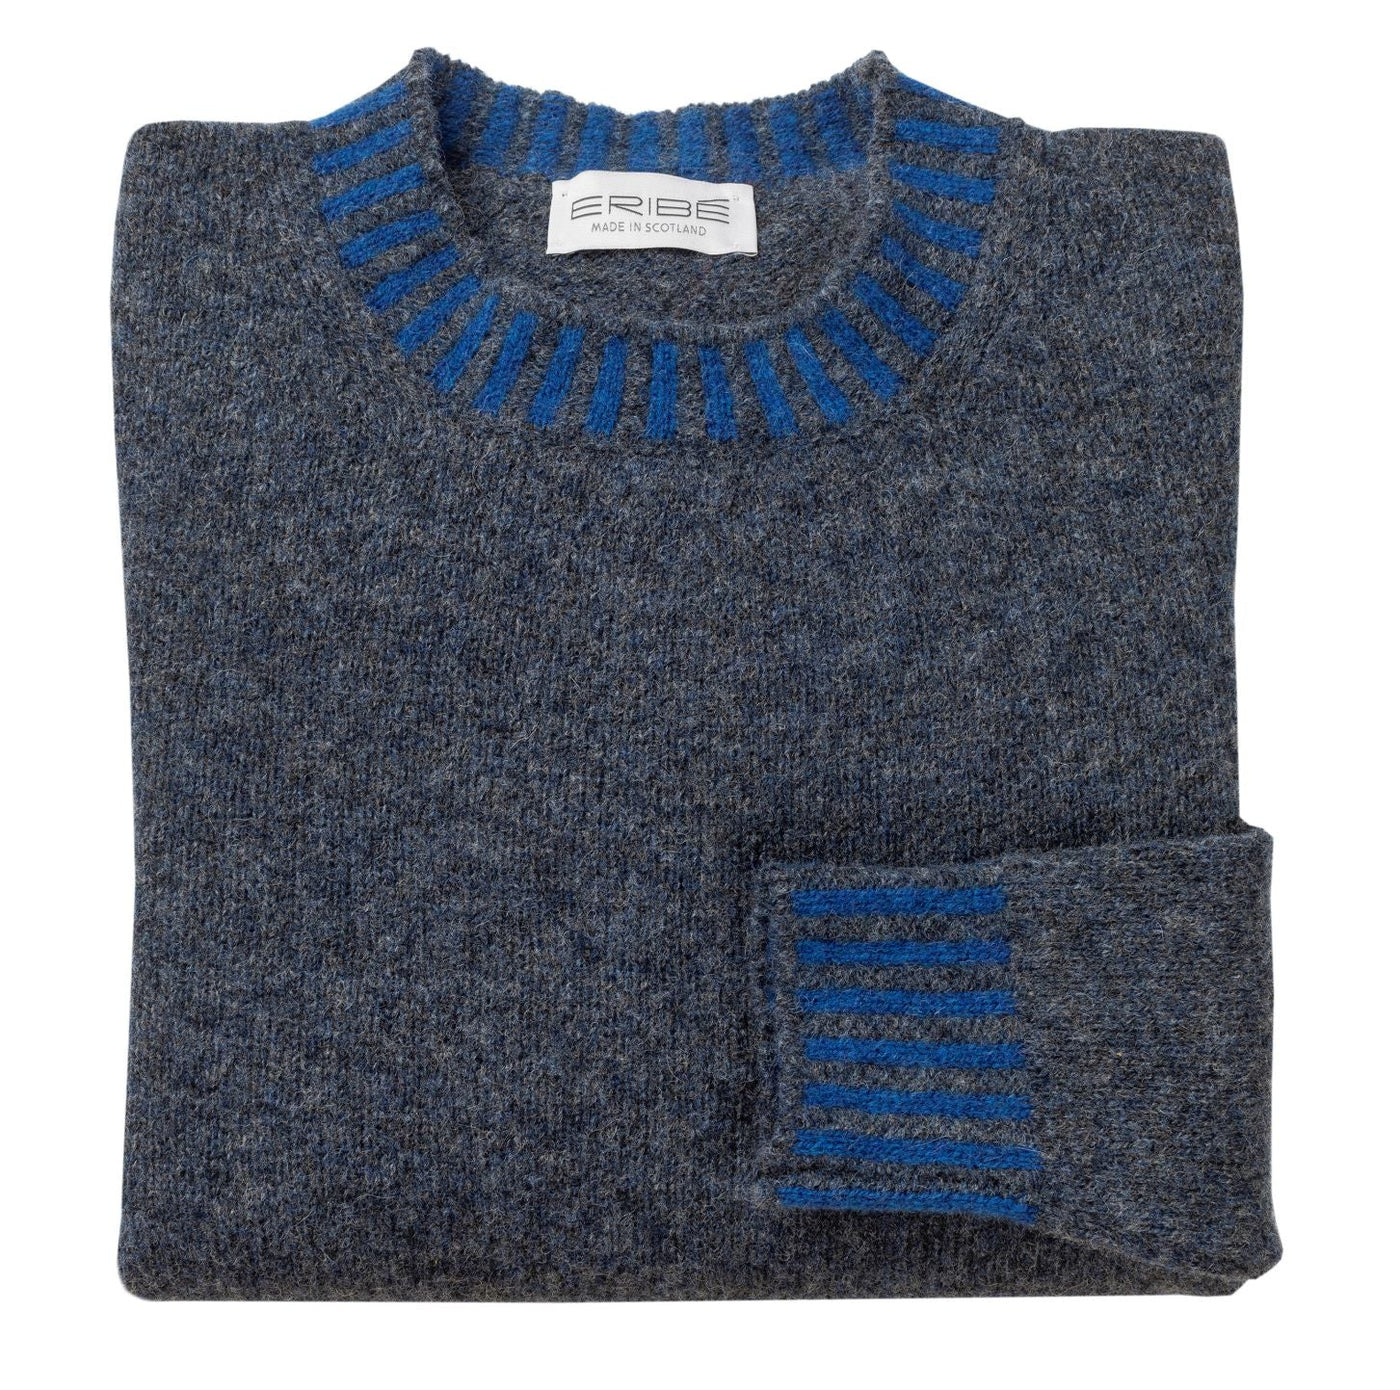 Eribe Bruar Sweater Blueberry- PLEASE CALL FOR SIZE AVAILABILITY